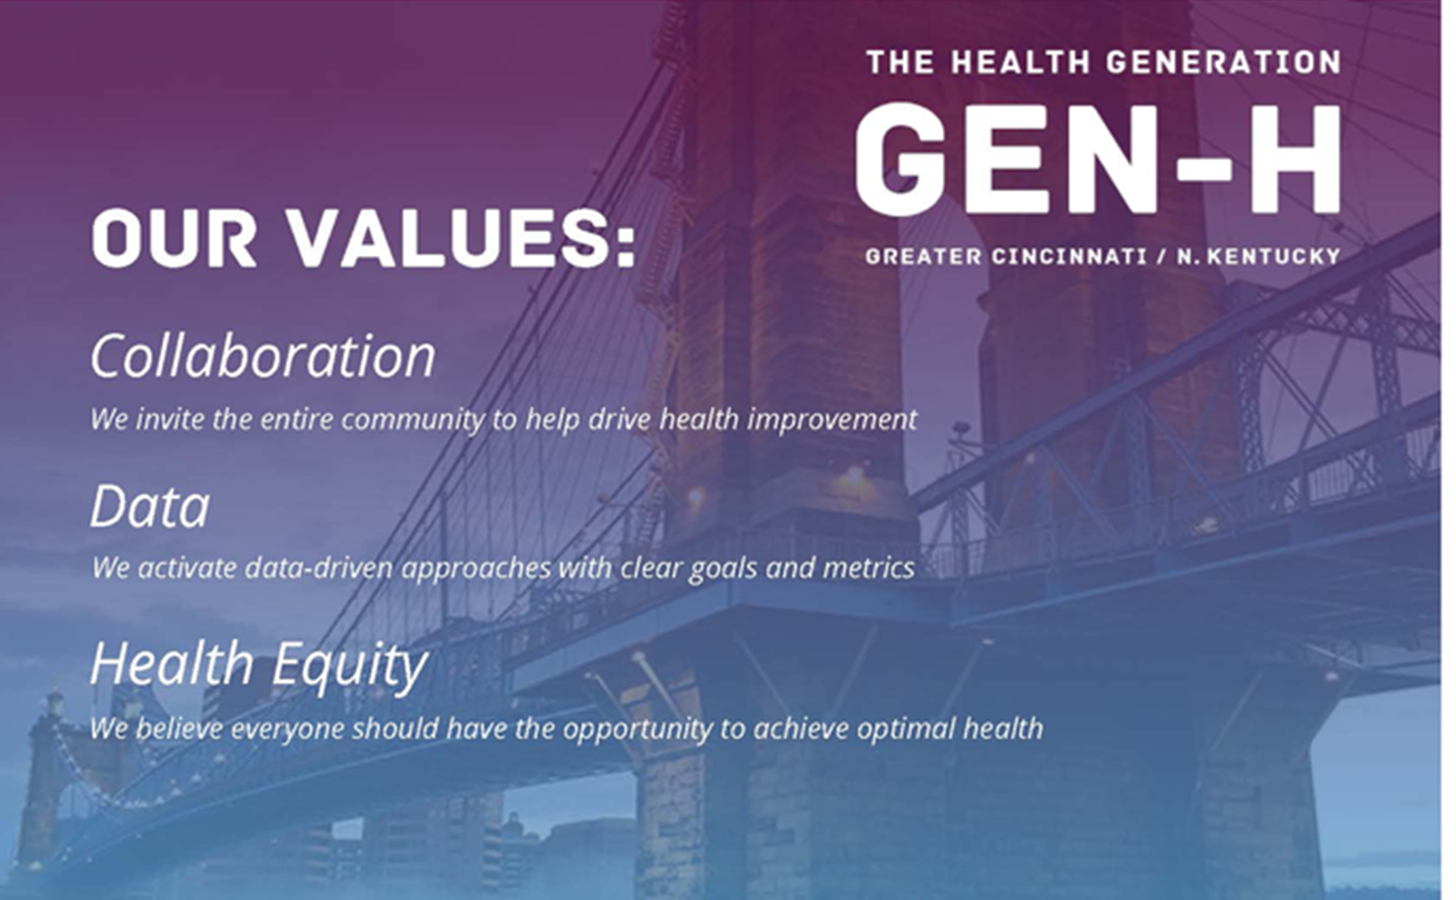 A listing of community health improvement initiative Gen-H's values, which inclue collaboration, data and health equity.